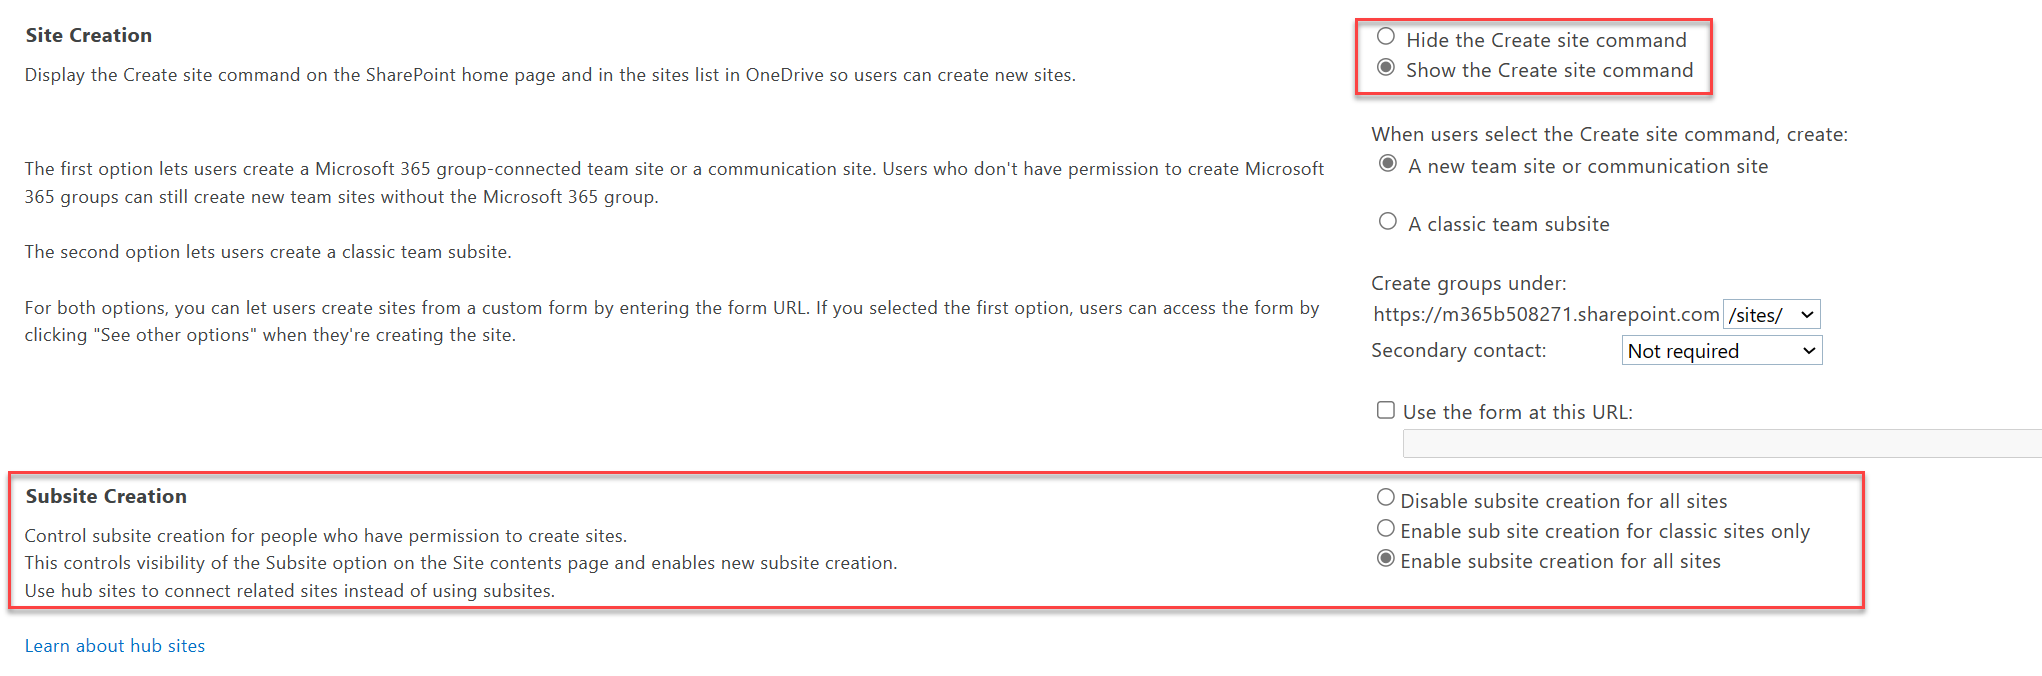 Screenshot of Site creation settings in the classic SharePoint admin center.